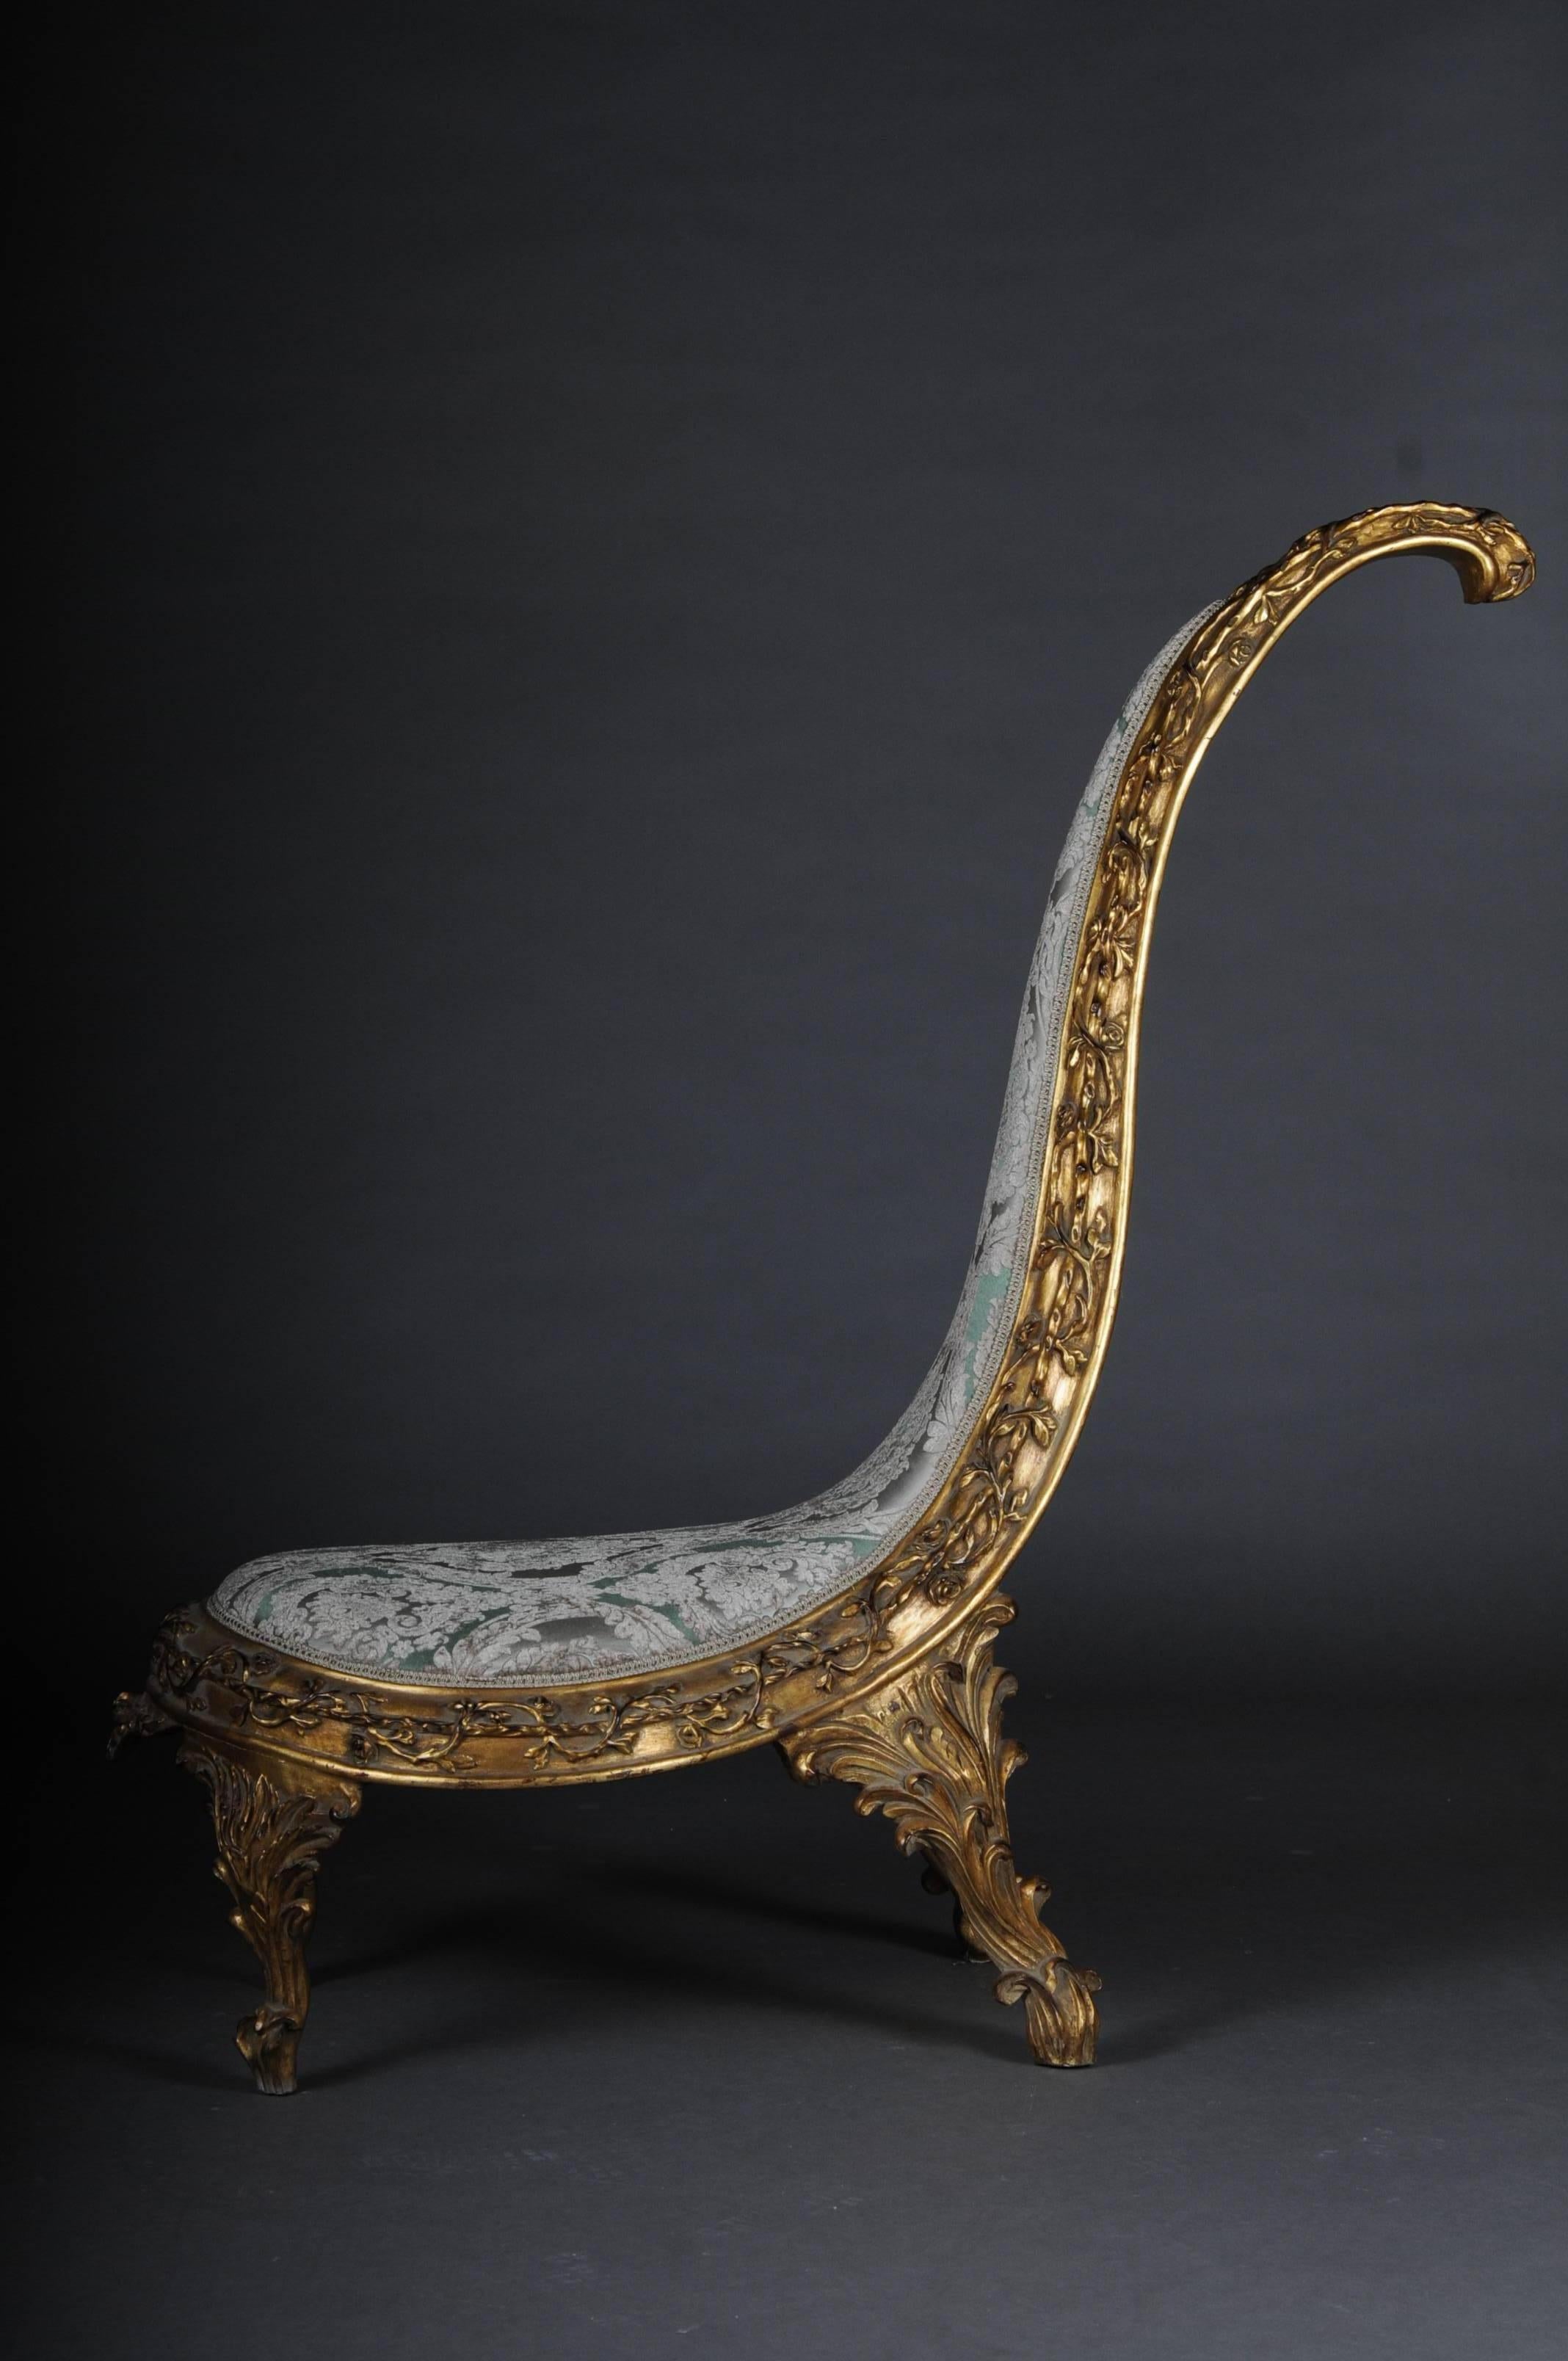 Solid beechwood, carved and gilt gilded. Strak crocheted frame on four curly, also heavily ornate legs. An absolute eye-catcher. Seat and backrest are finished with a historical, classic upholstery.


(B-Dom-89).